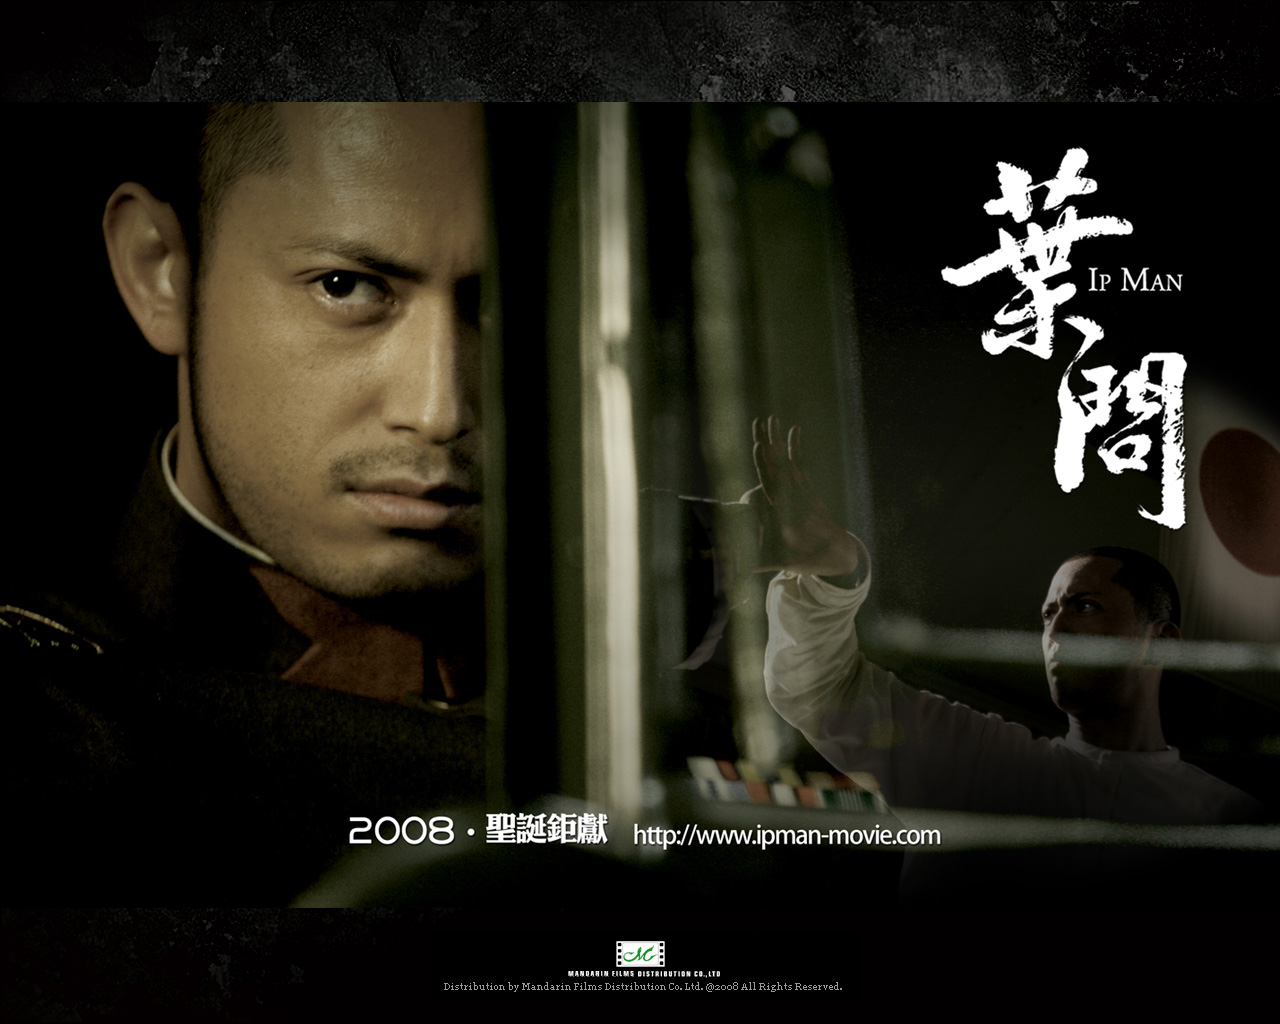 Ip Man wallpaper 02 in wallpapers album :: photos and posters in ...